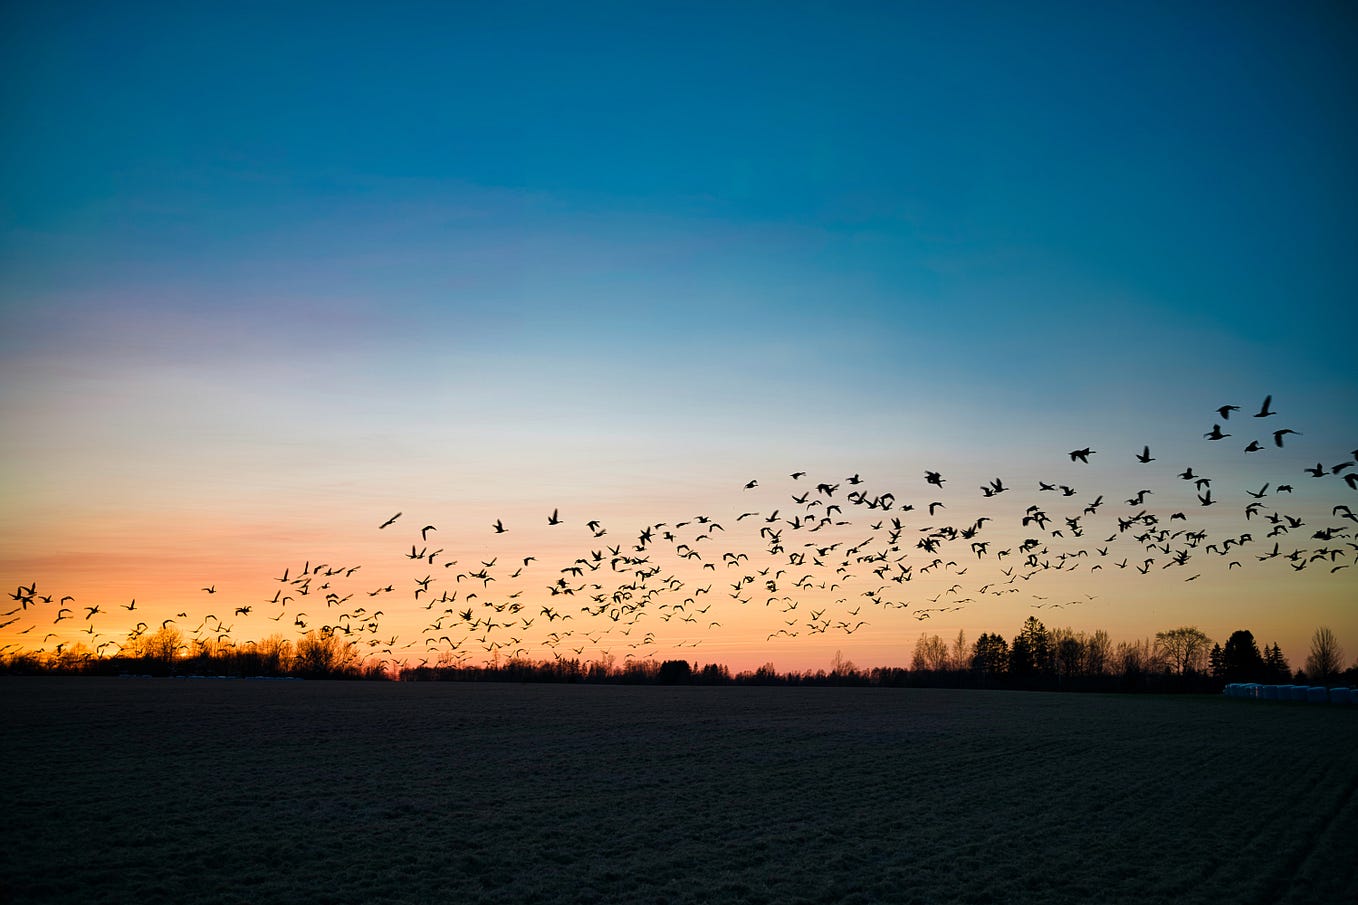 A group of birds are flying across the sunset lit sky